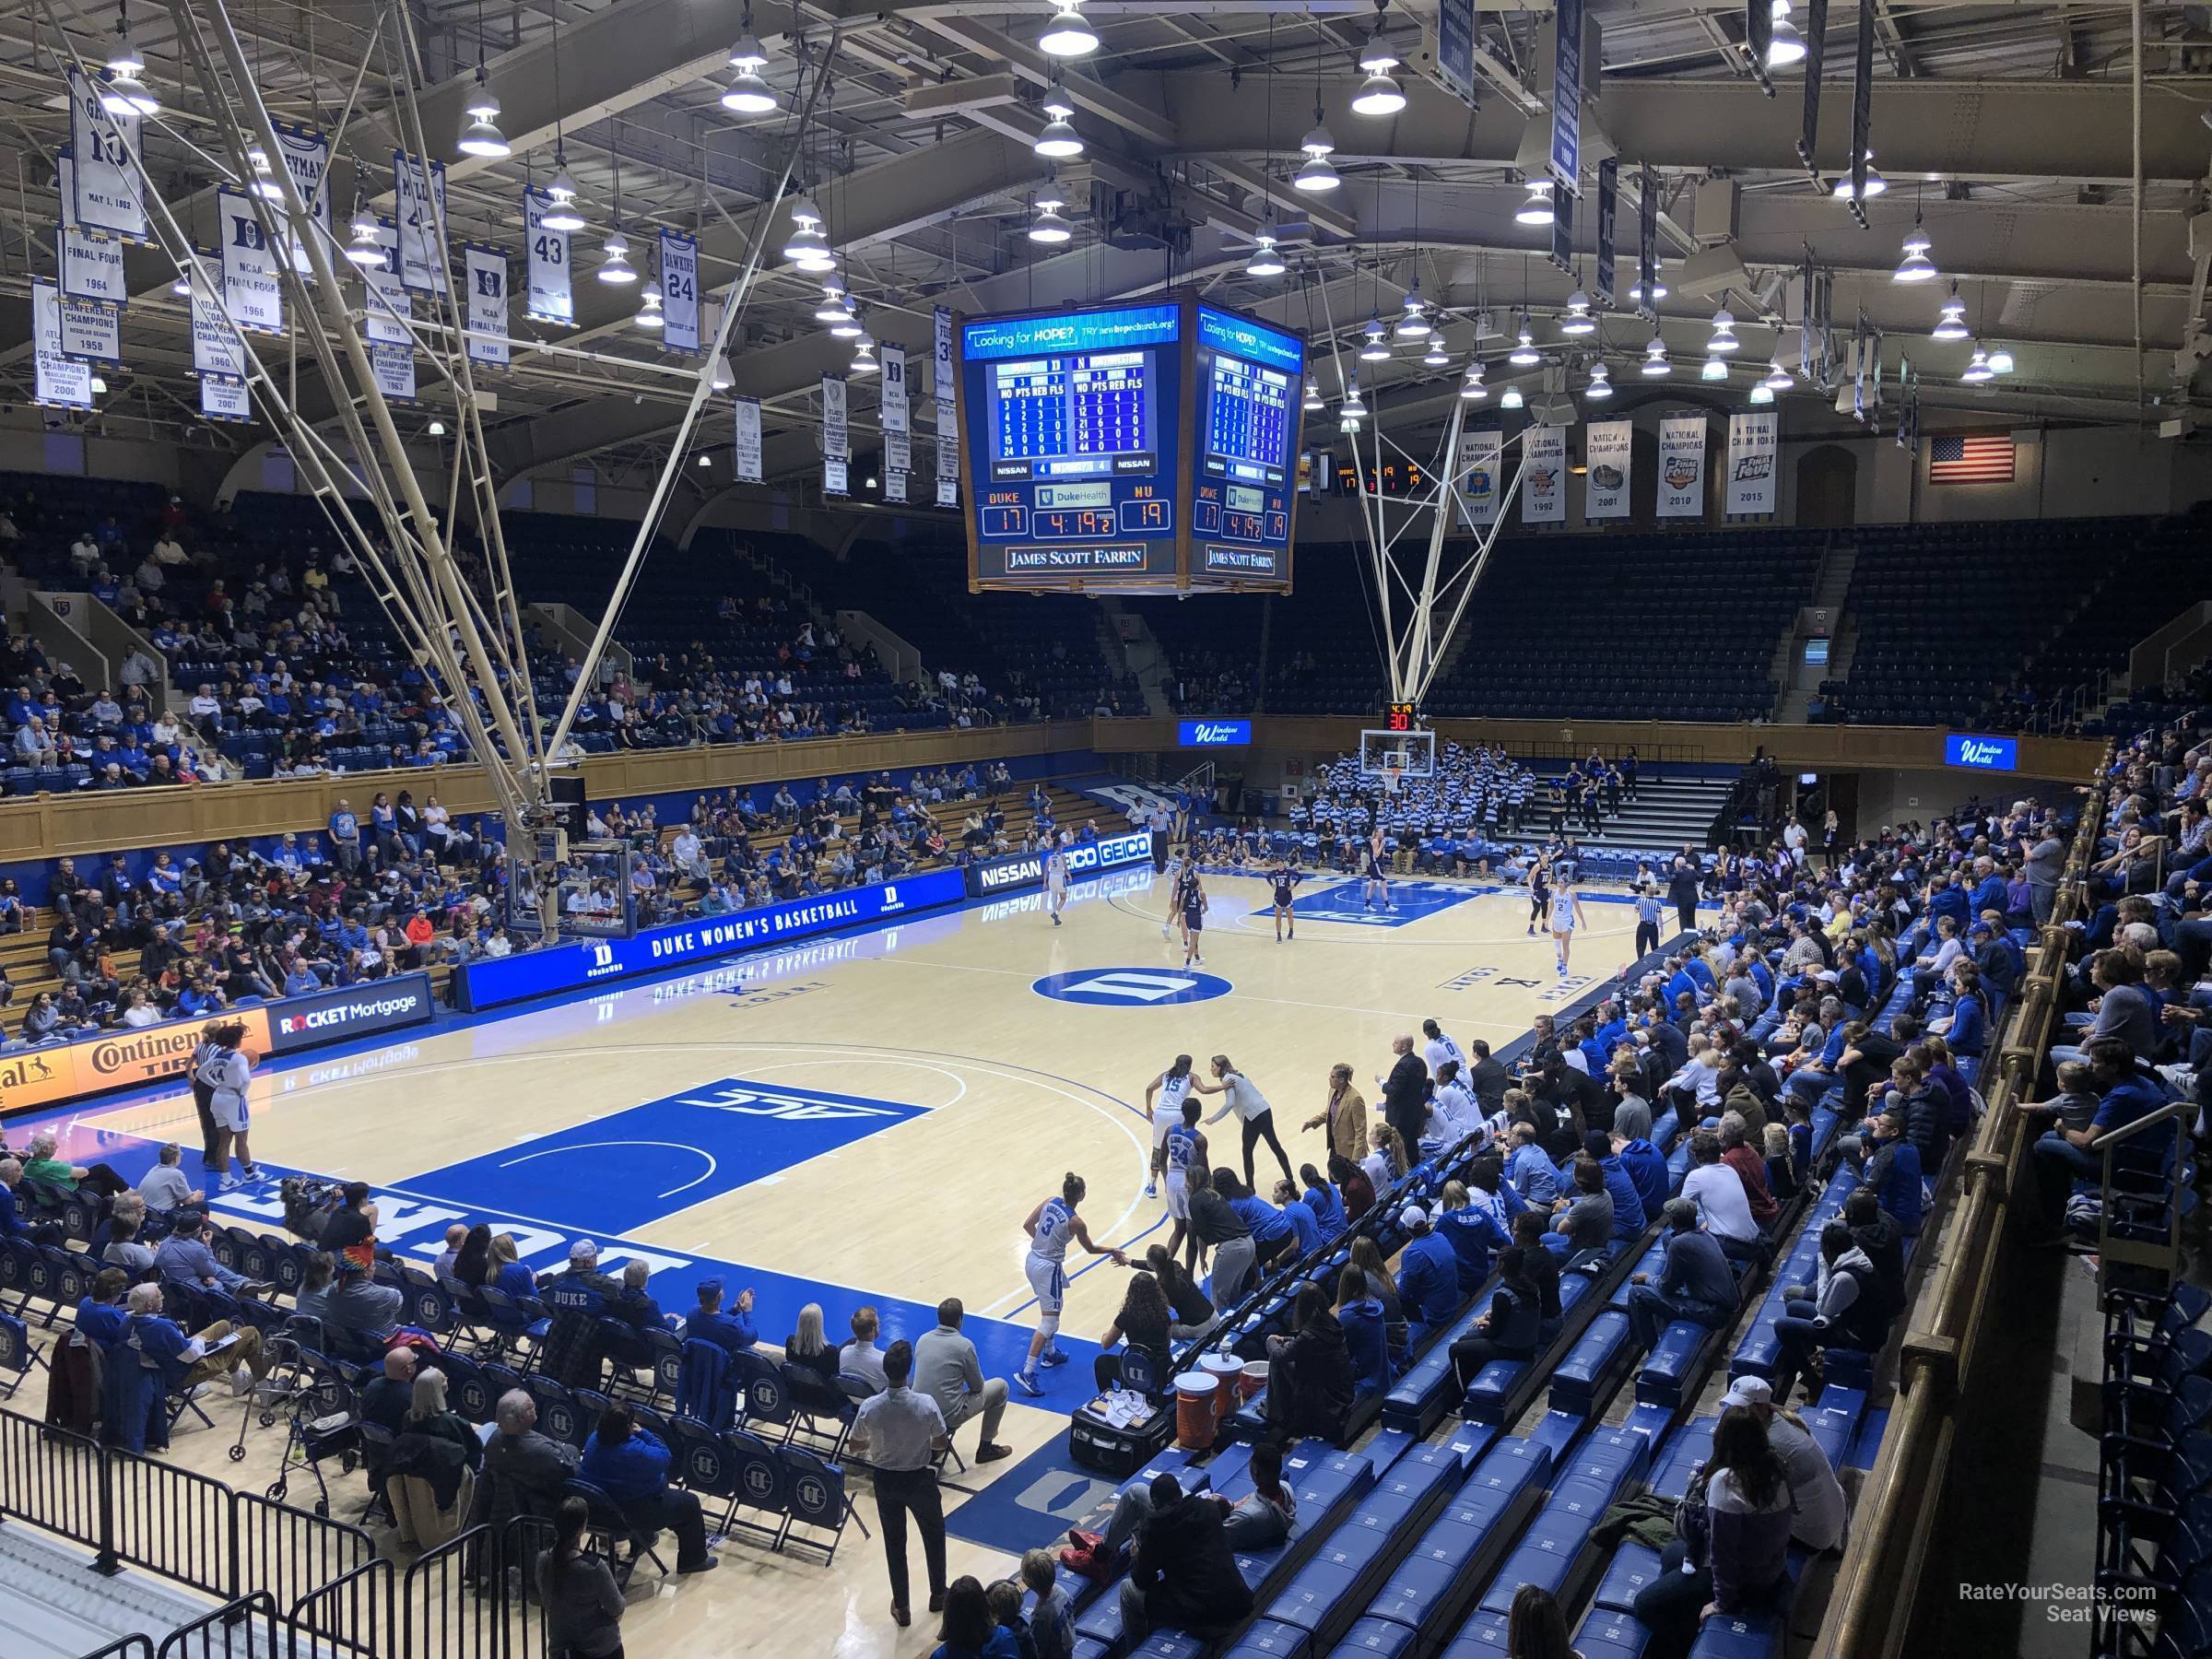 Section 4 at Cameron Indoor Arena - RateYourSeats.com